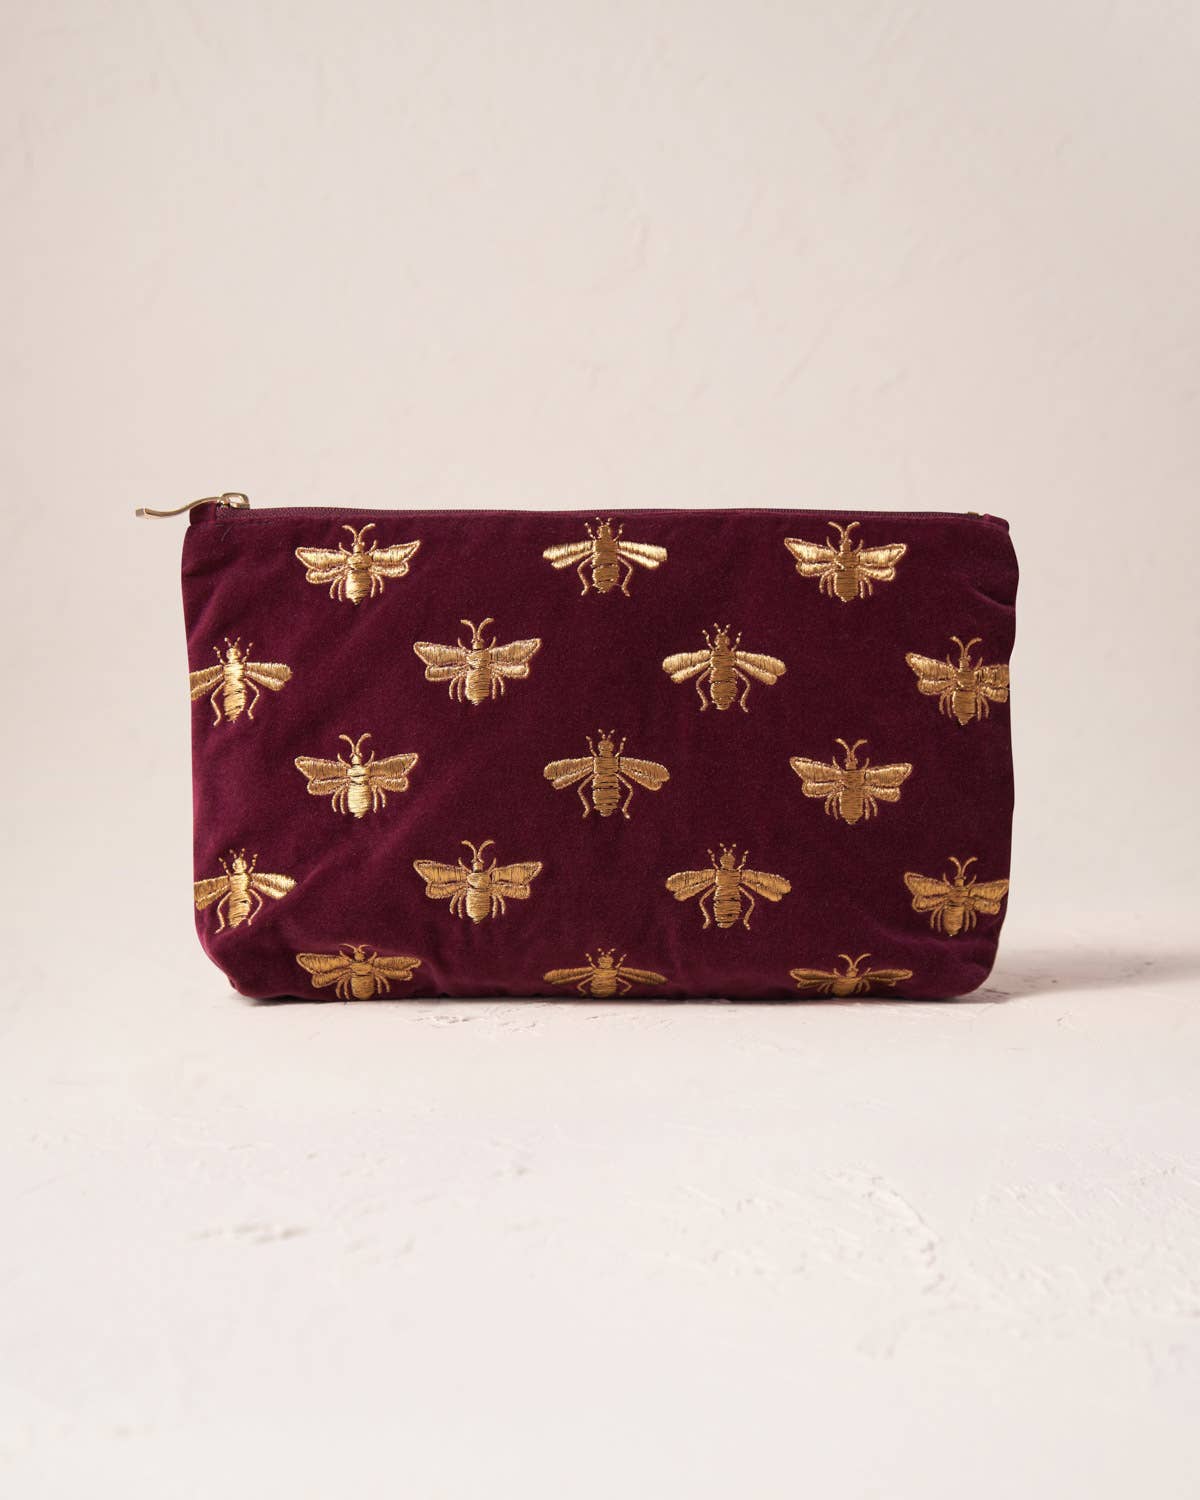 Louis Vuitton, upcycled, handpainted jungle print cosmetic pouch